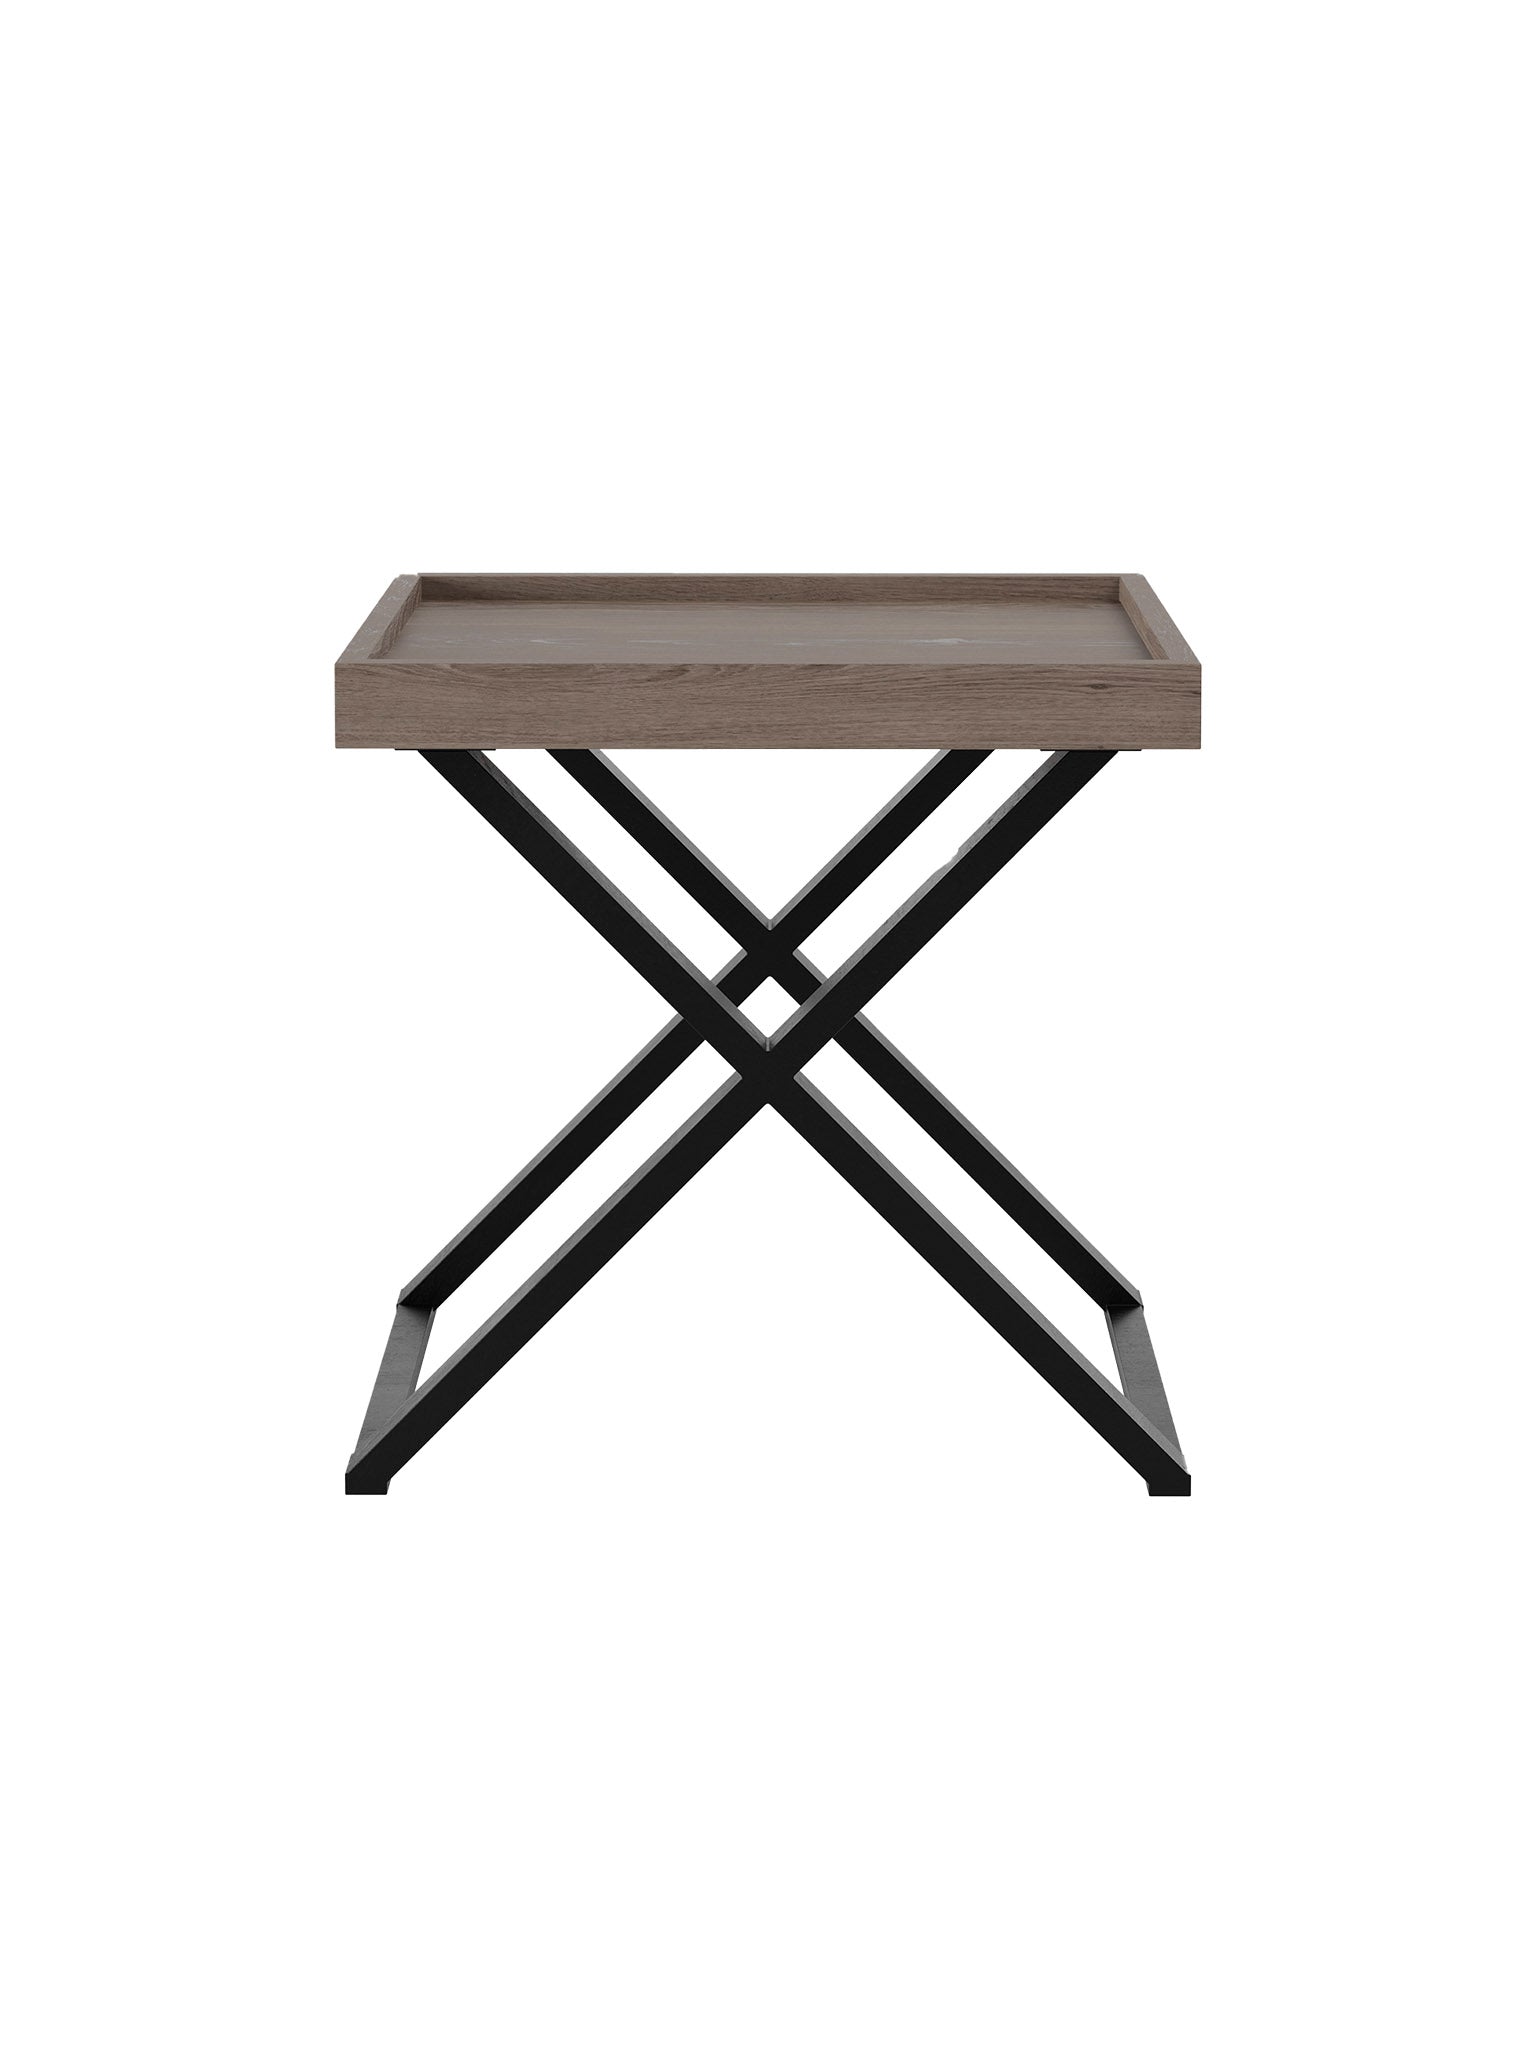 wooden end table with metal crossed legs